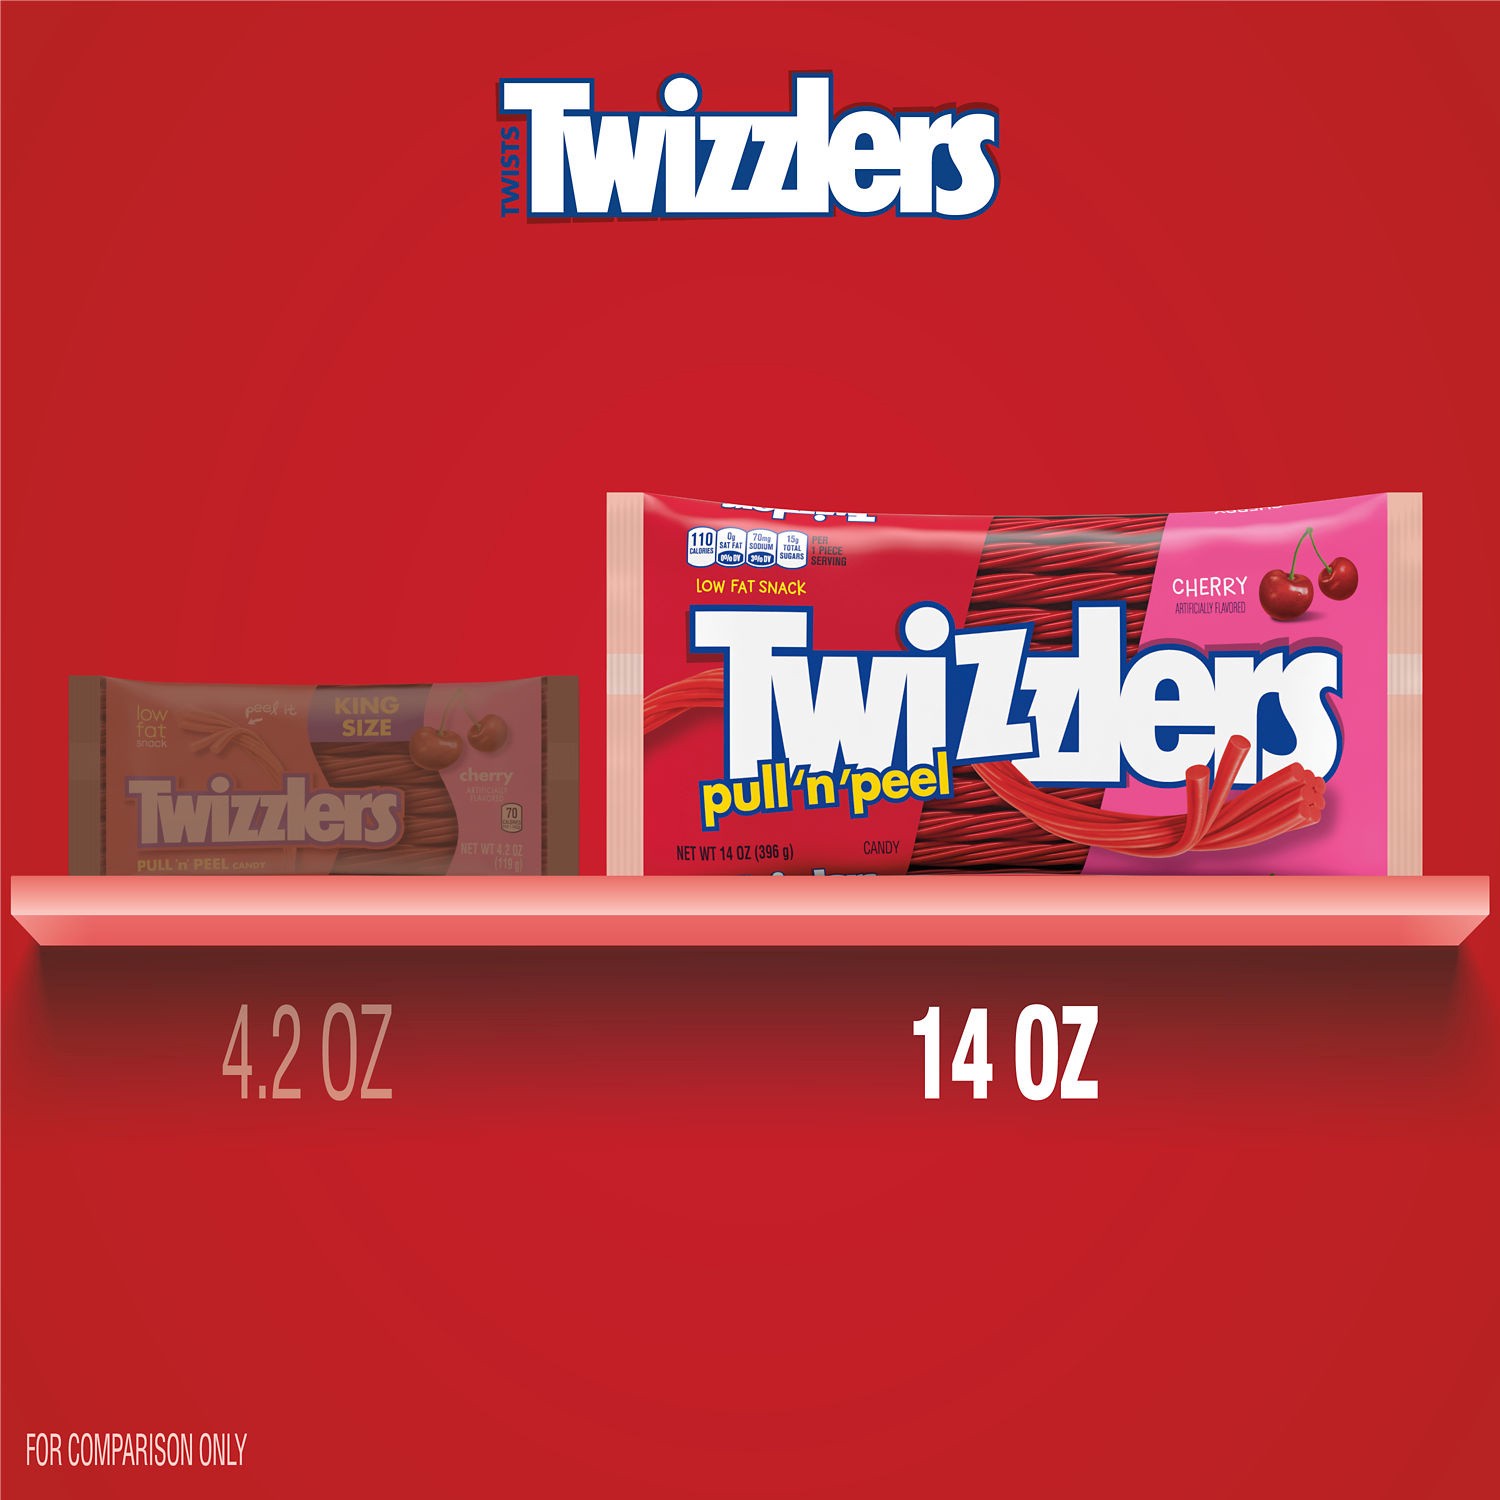 slide 2 of 7, Twizzlers PULL 'N' PEEL Cherry Flavored Licorice Style, Low Fat Candy Bag, 14 oz, 14 oz